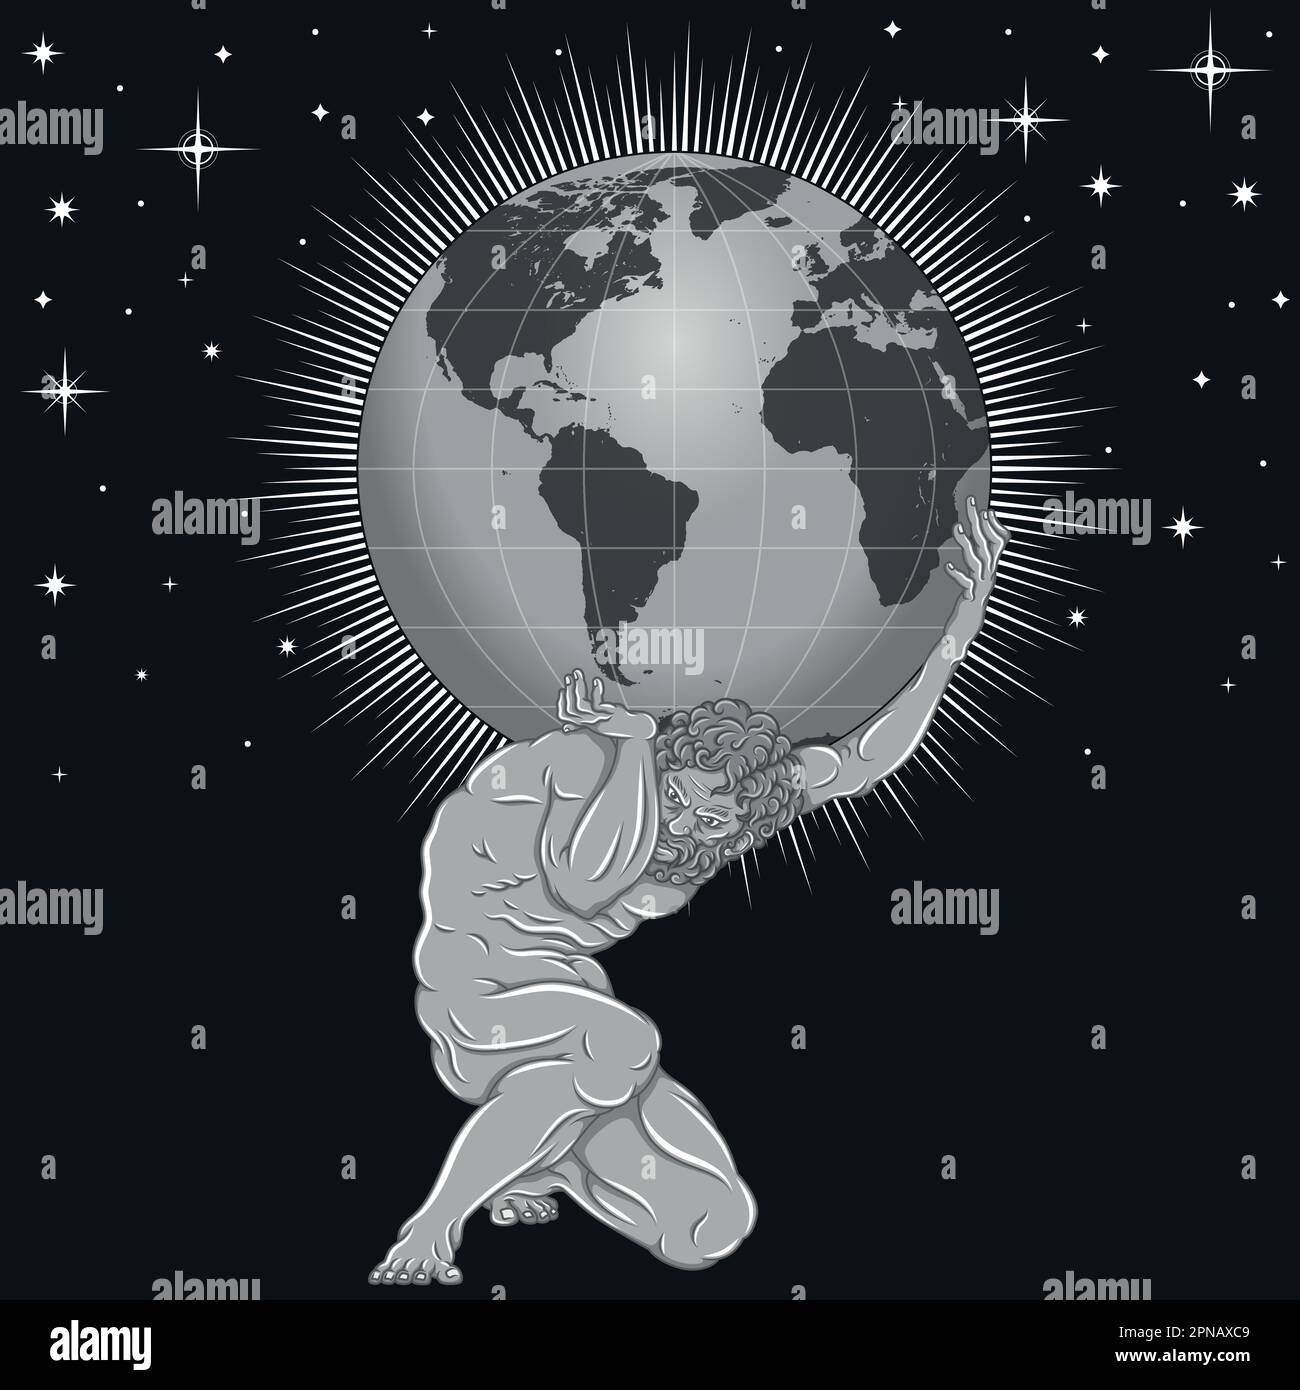 Vector design of titan Atlas holding planet earth on his shoulders, titan from greek mythology holding earth sphere with starry background Stock Vector